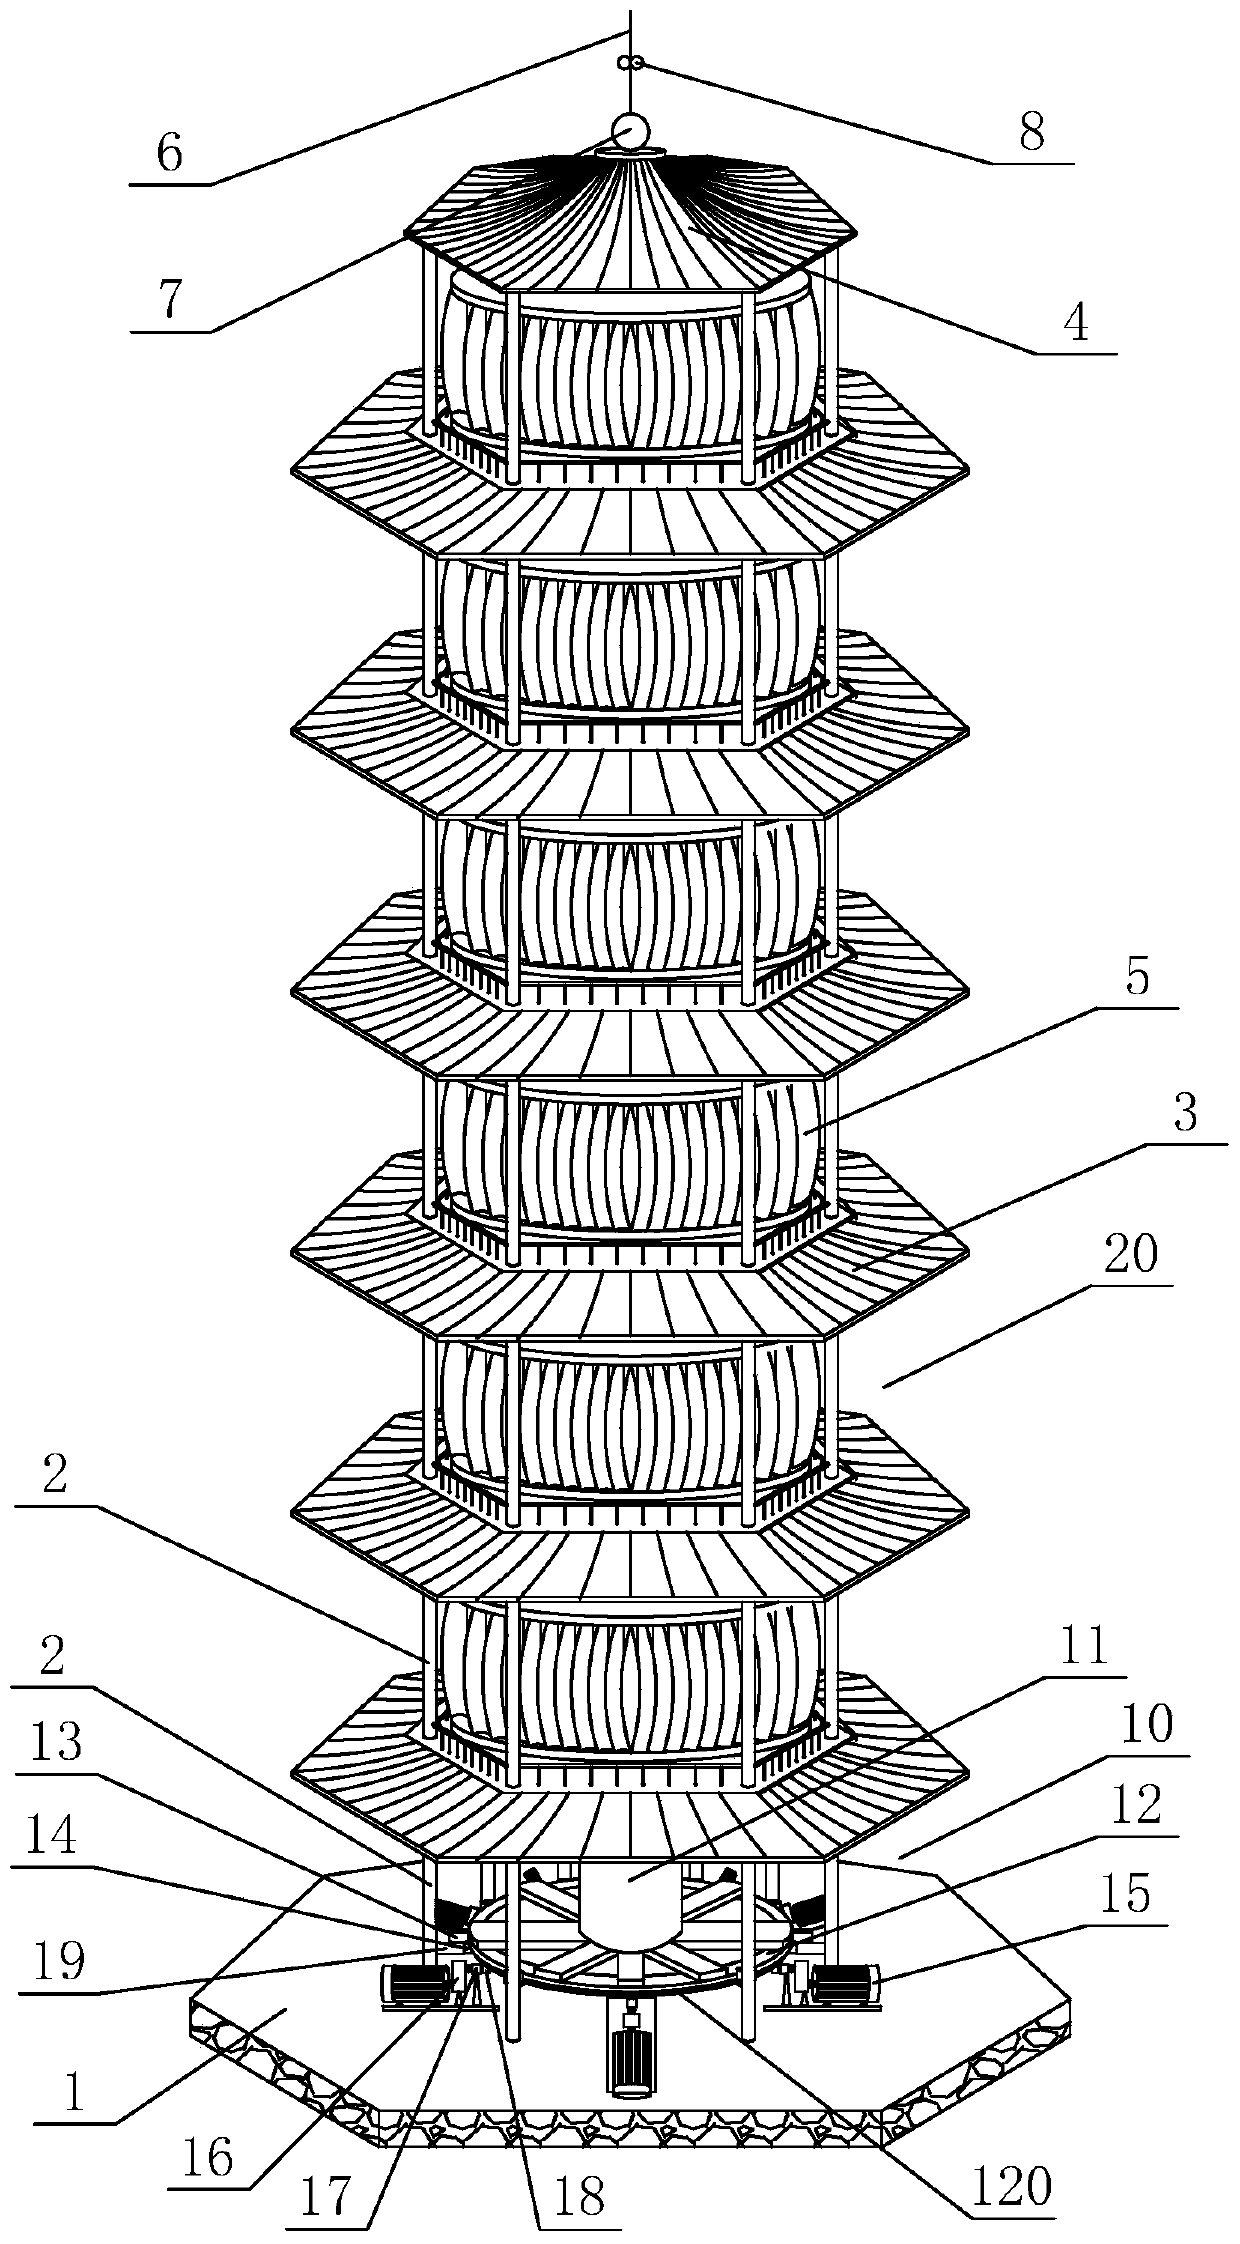 Fan main shaft and vertical axis wind turbine